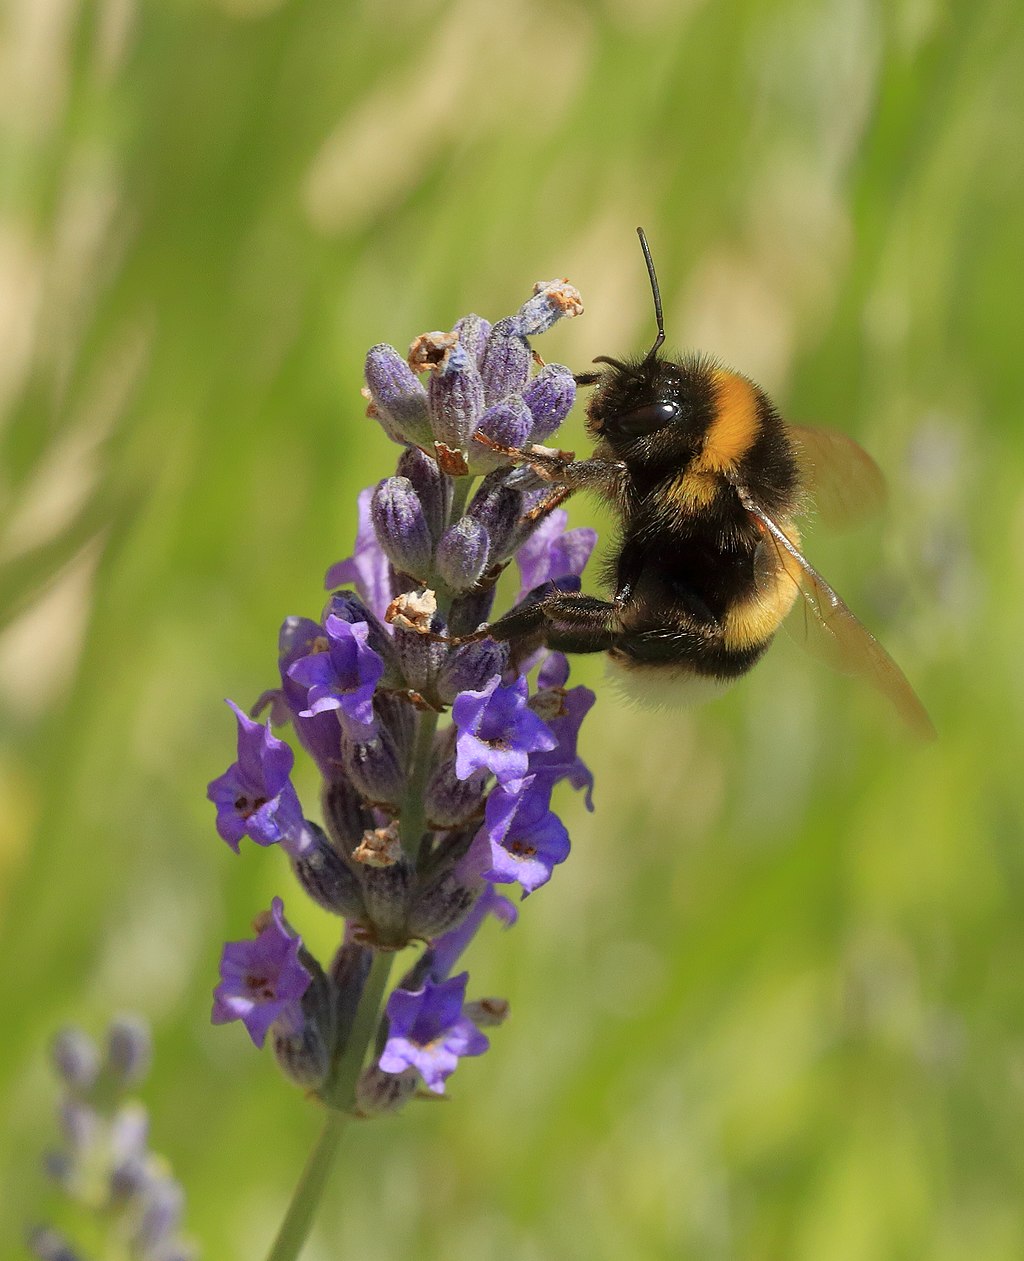 Bumblebee on Lavender Blossom